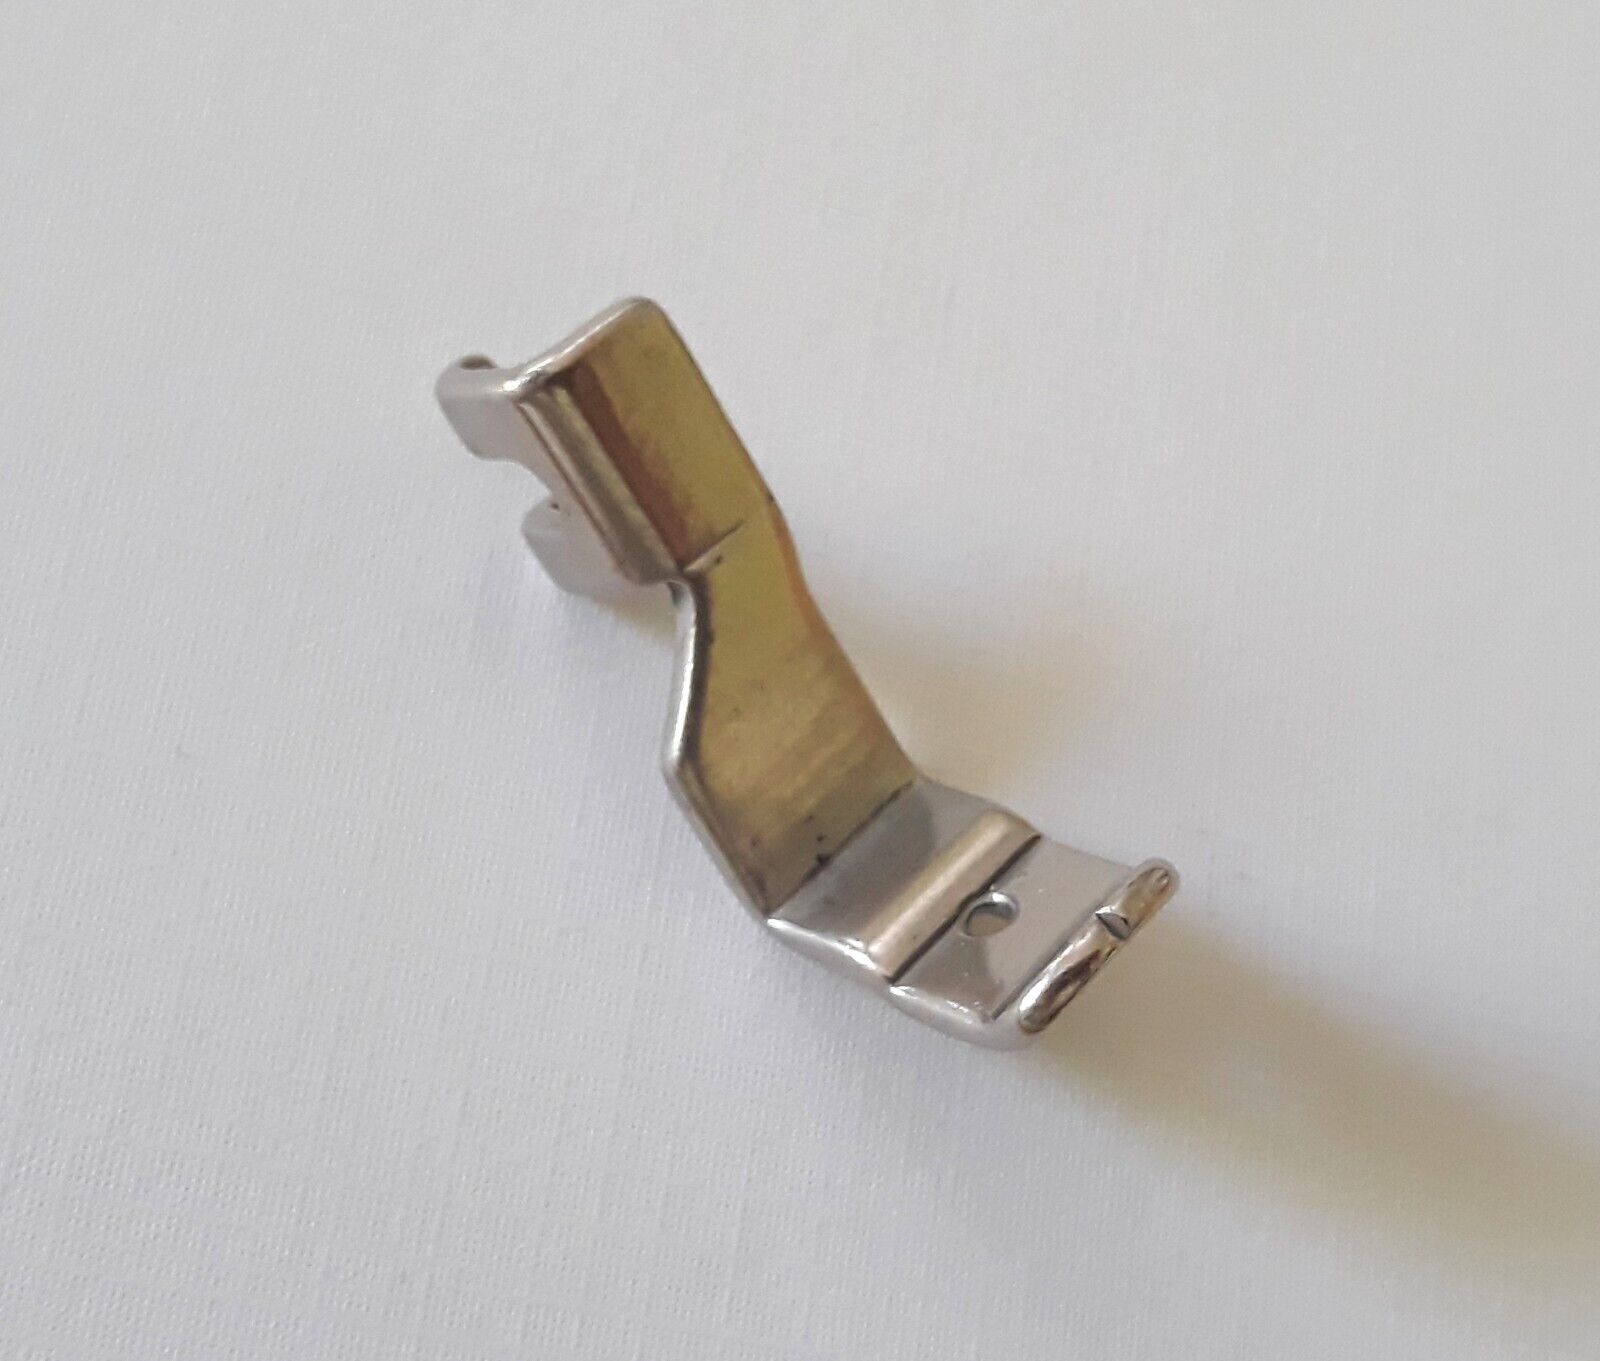 Singer Sewing Machine Slant Accessory Attachment Shirrer Foot 160628 301 401 500